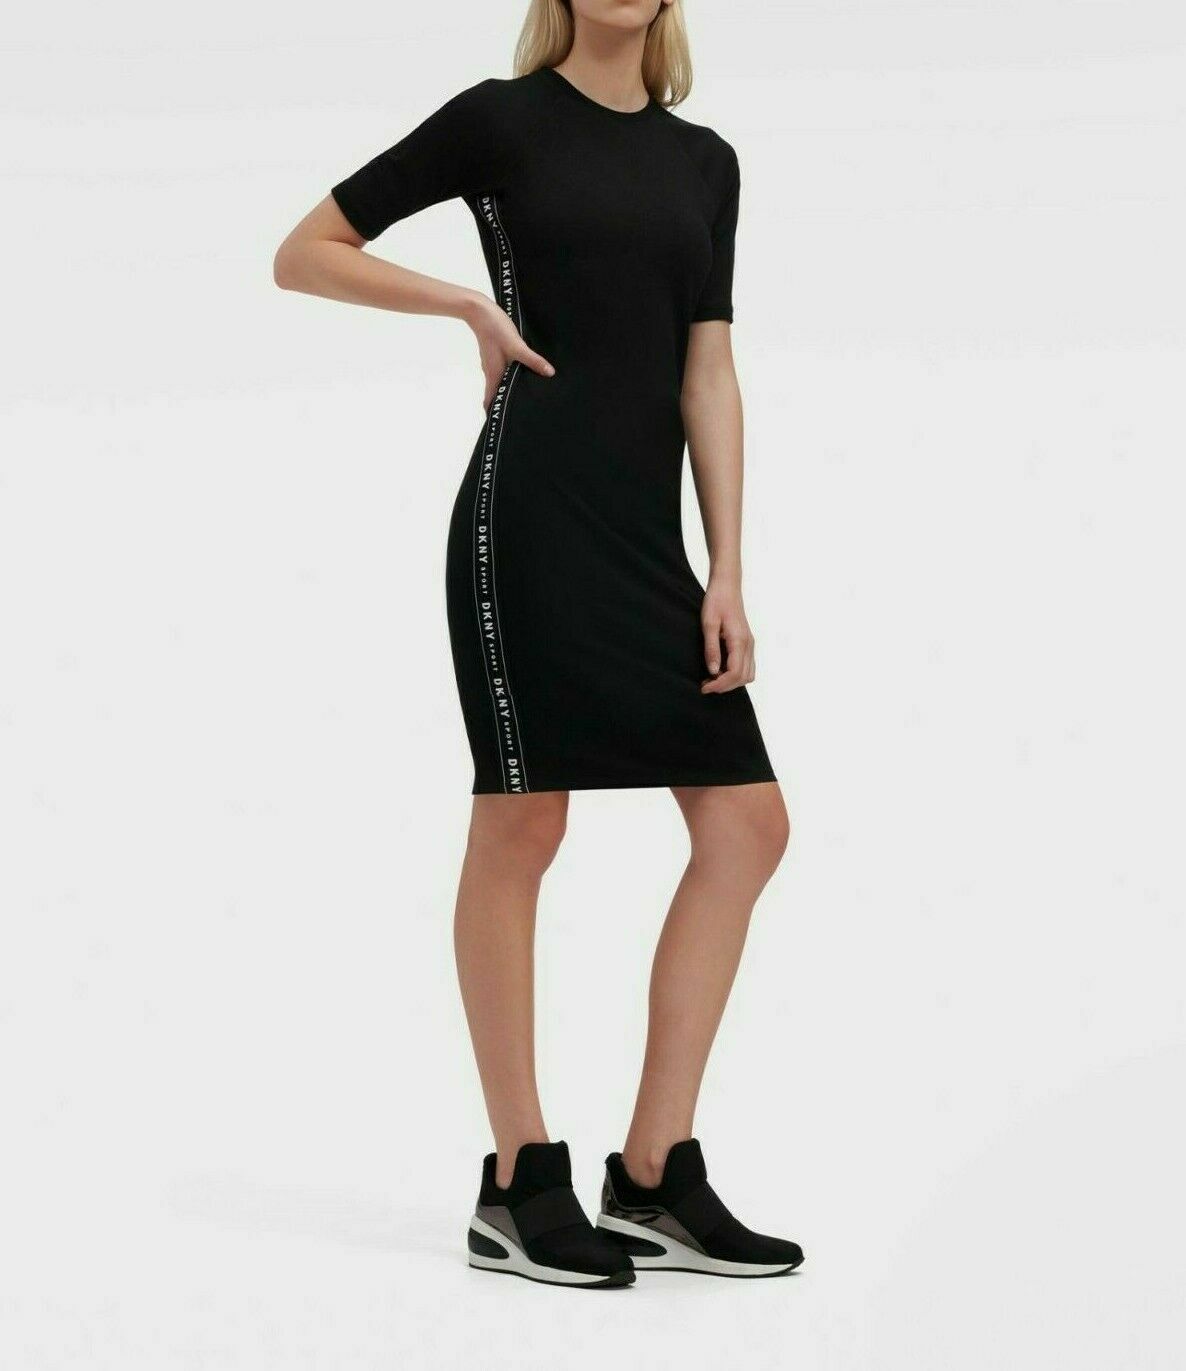 DKNY Contrast letter tape Dress Elastic Black M L Mid short sleeves Authentic